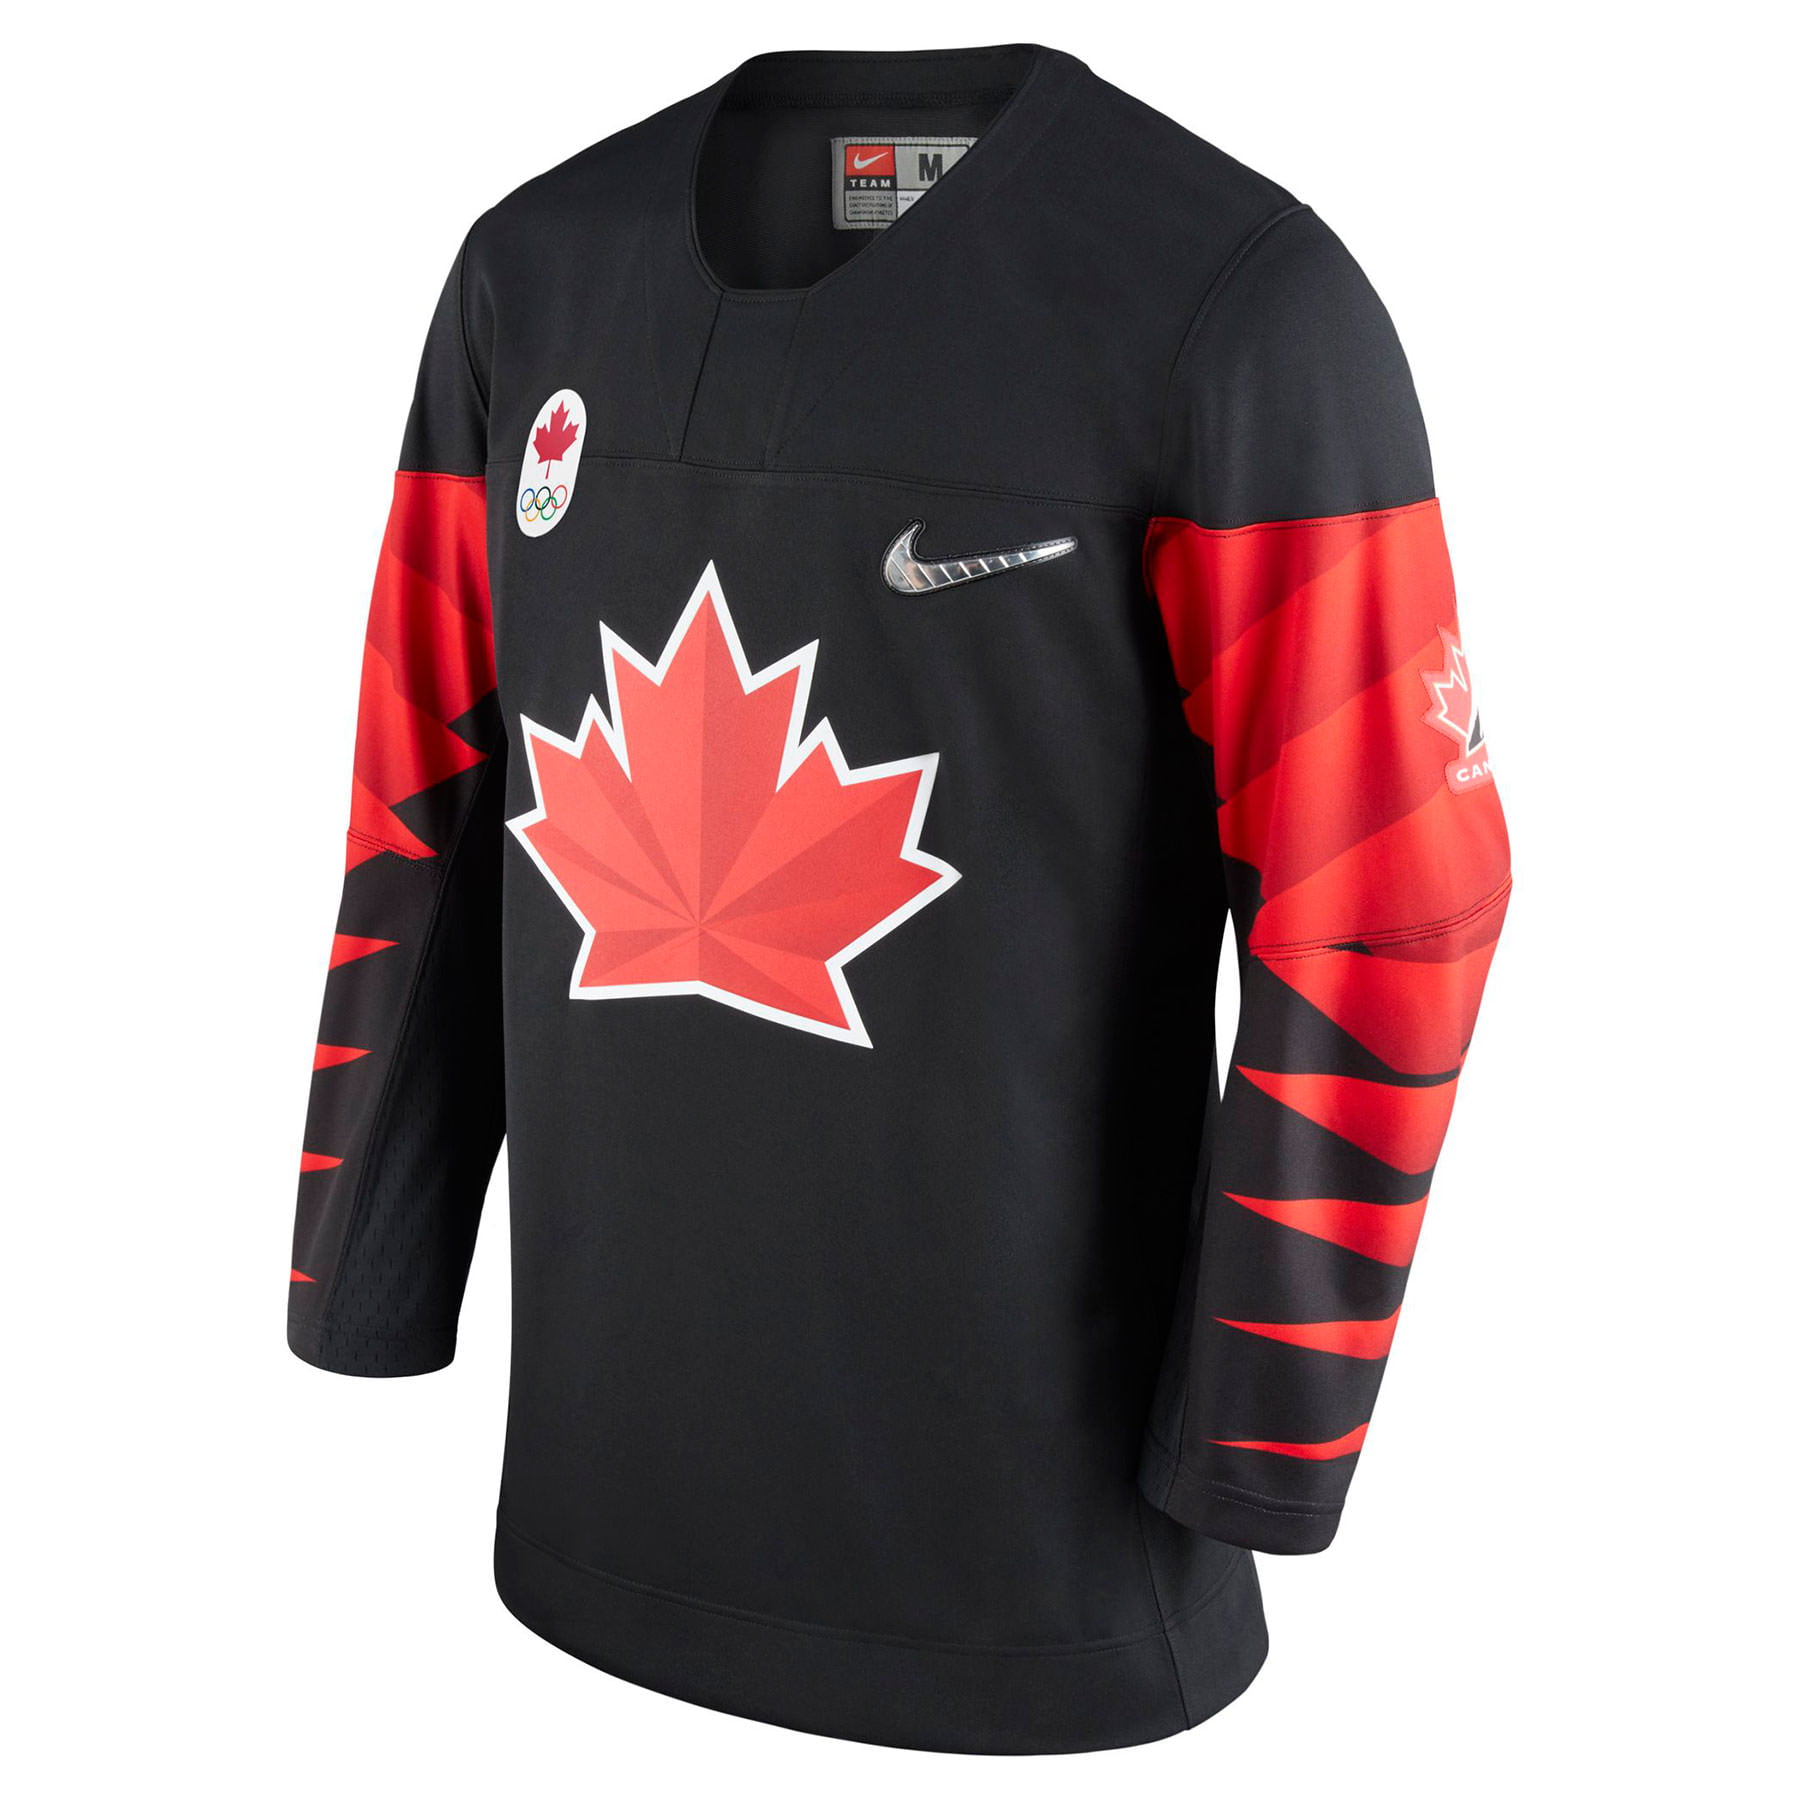 canada olympic jersey